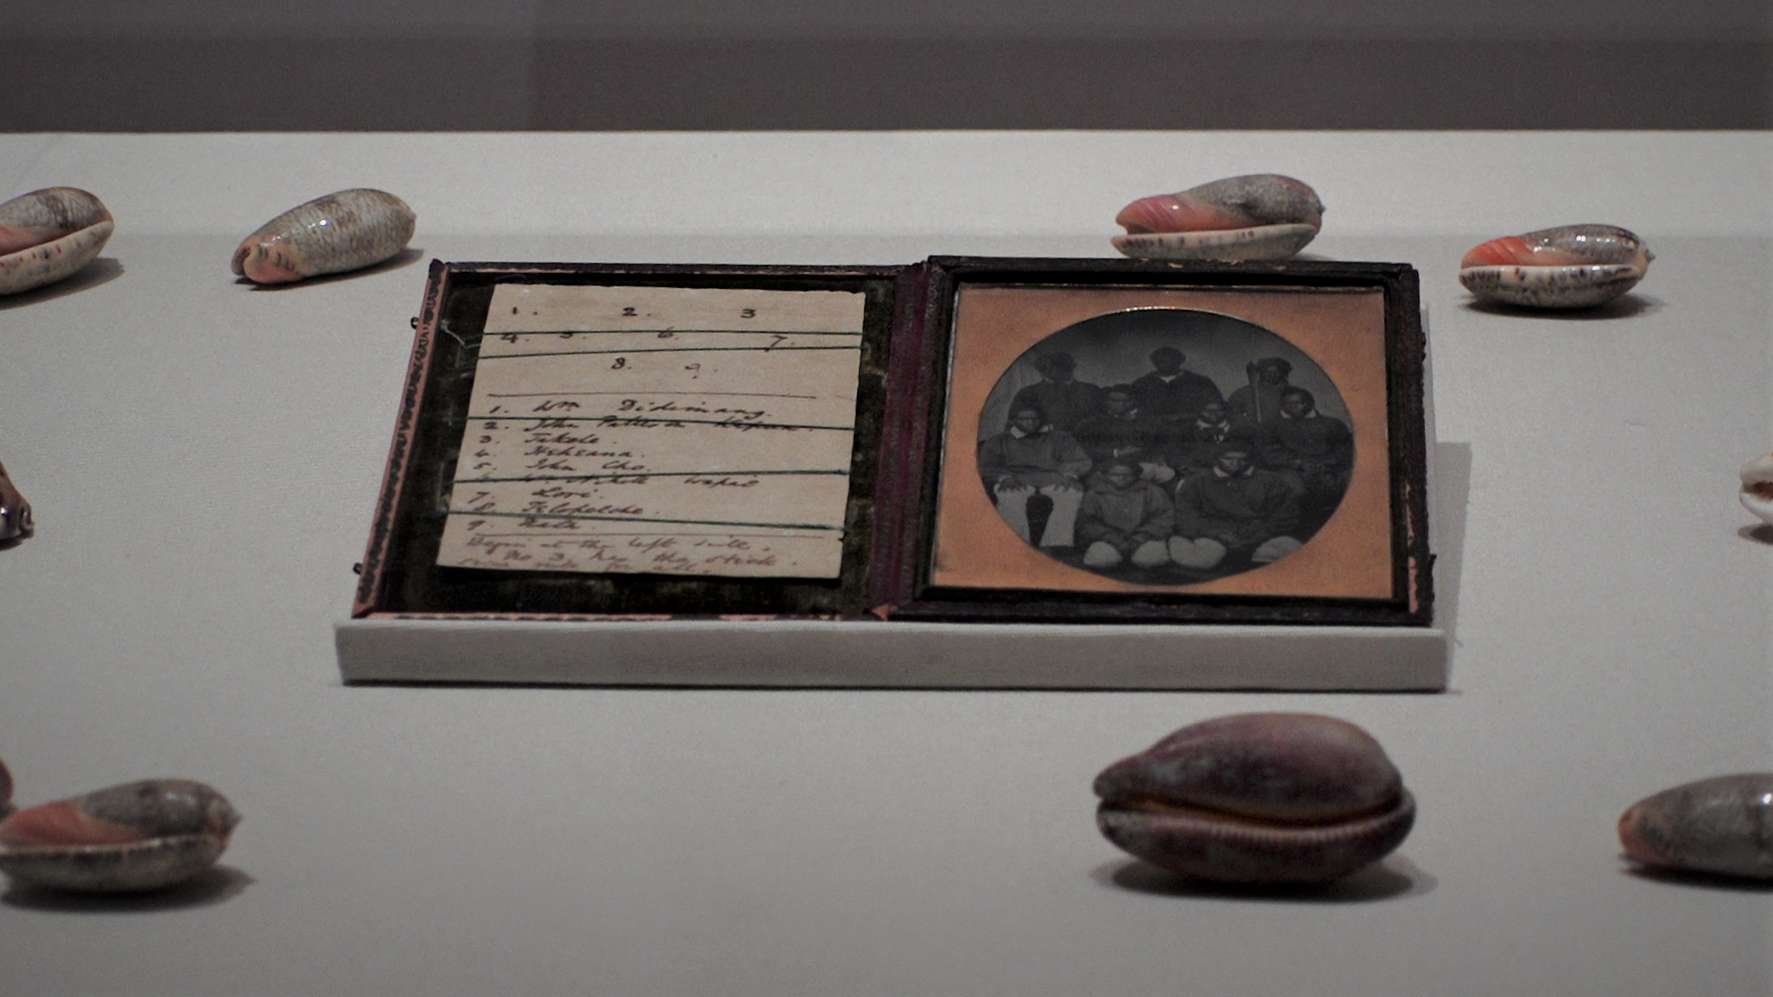 An ambrotype and these small shells are what are left to telll the story of the Melanesian students